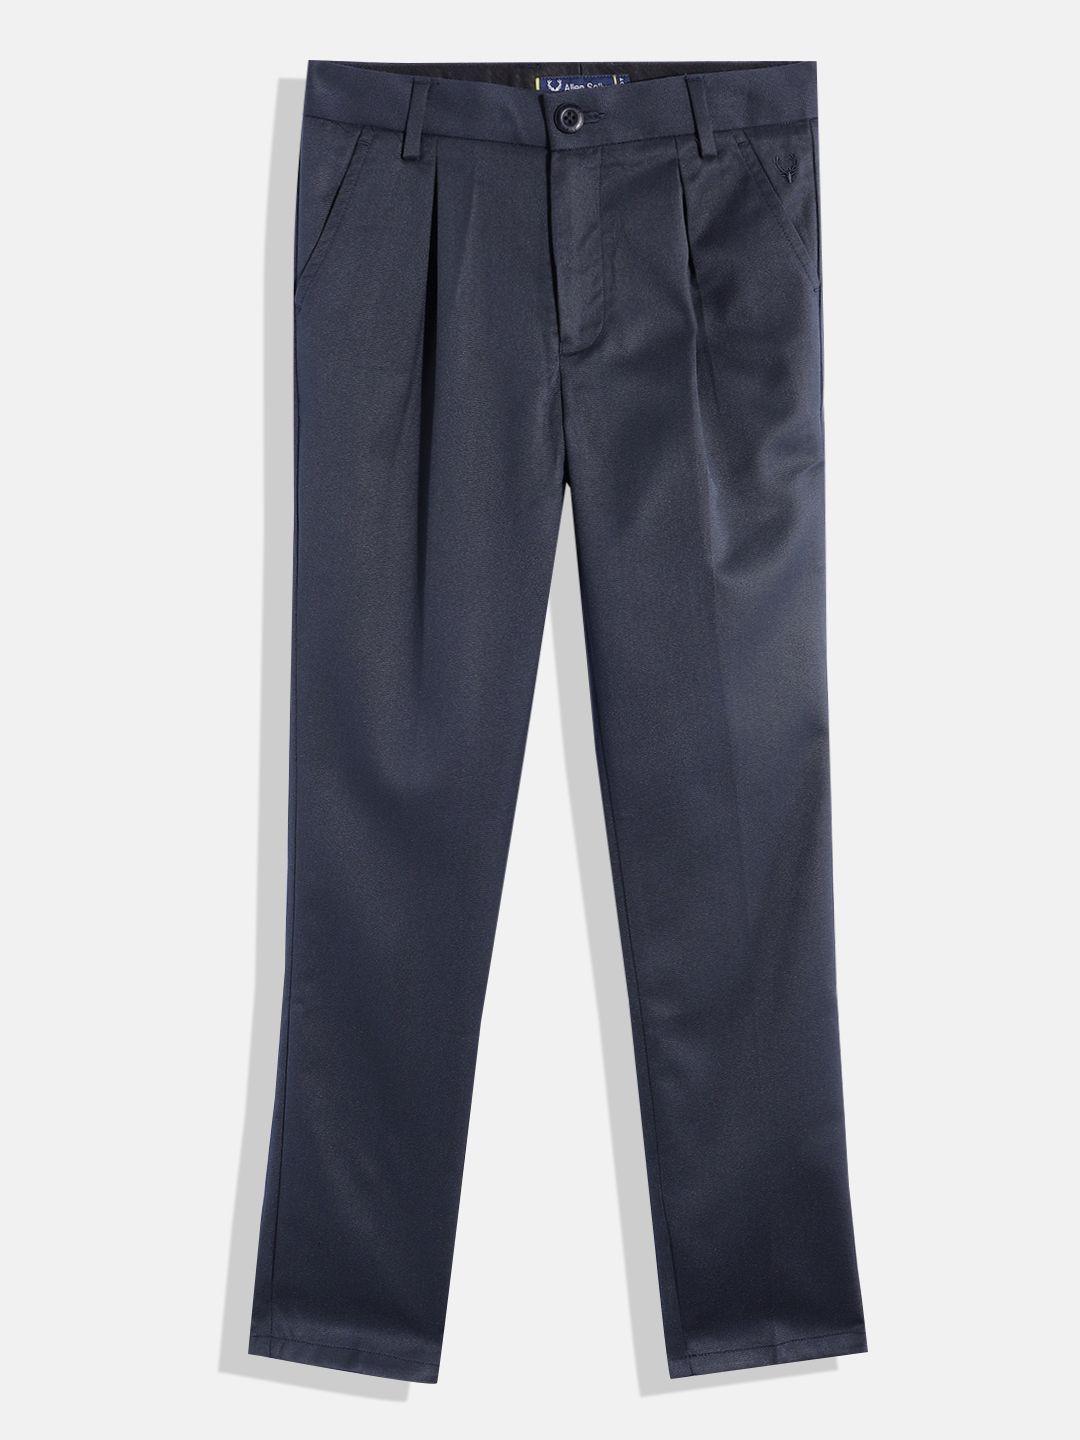 allen solly junior boys slim fit pleated chinos trousers